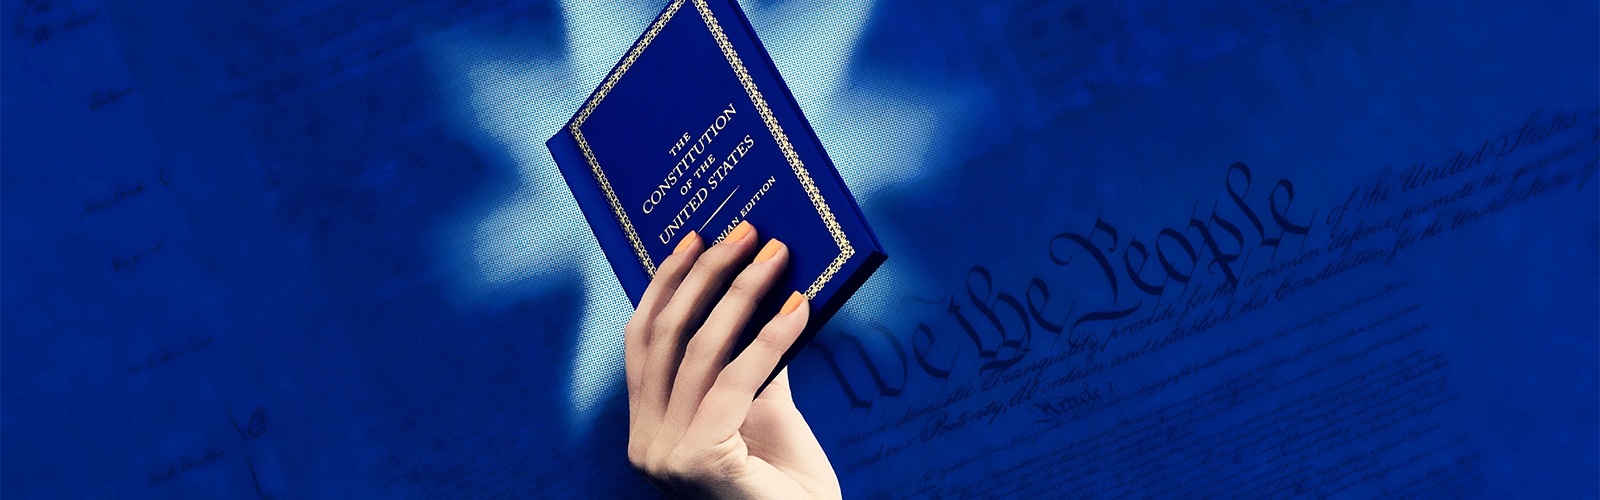 A woman holds a blue pocket sized version of The Constiution of the United States